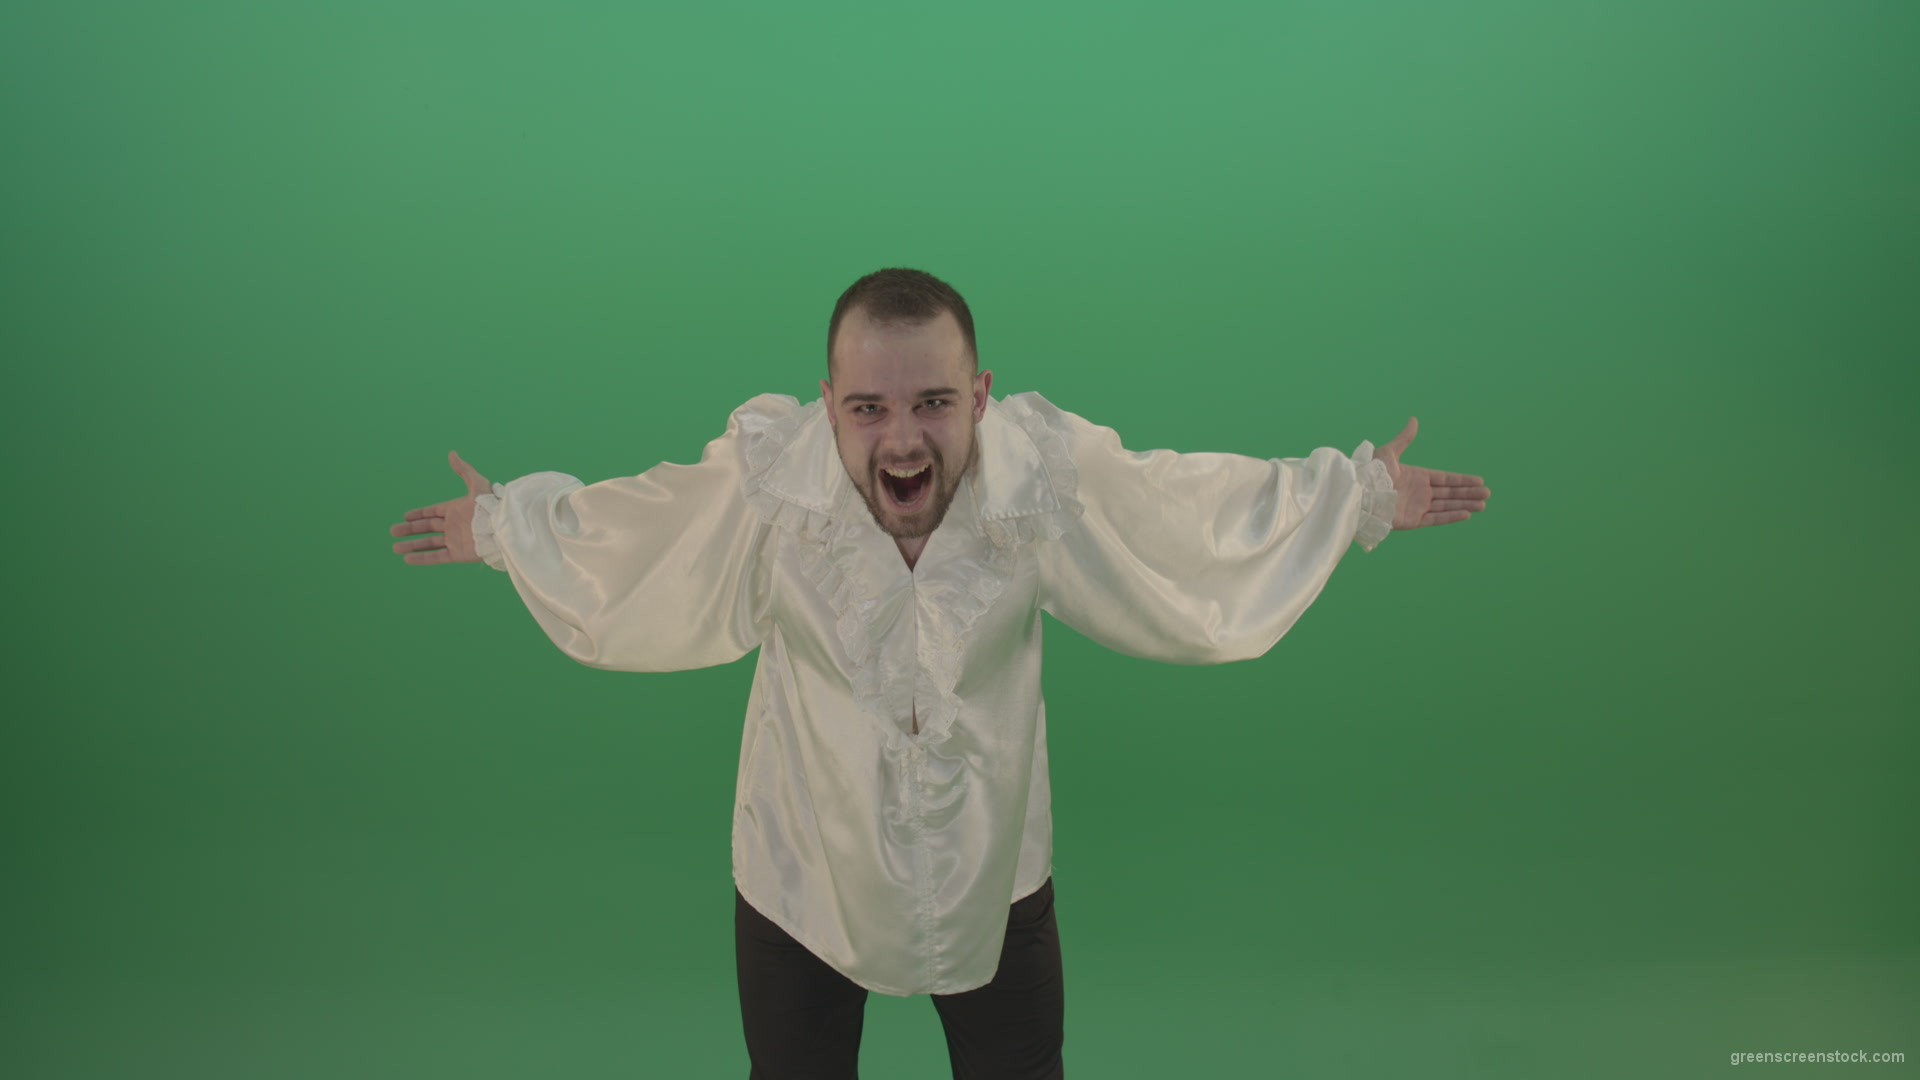 Sinister-laugh-from-the-professional-actor-man-isolated-on-green-background_007 Green Screen Stock